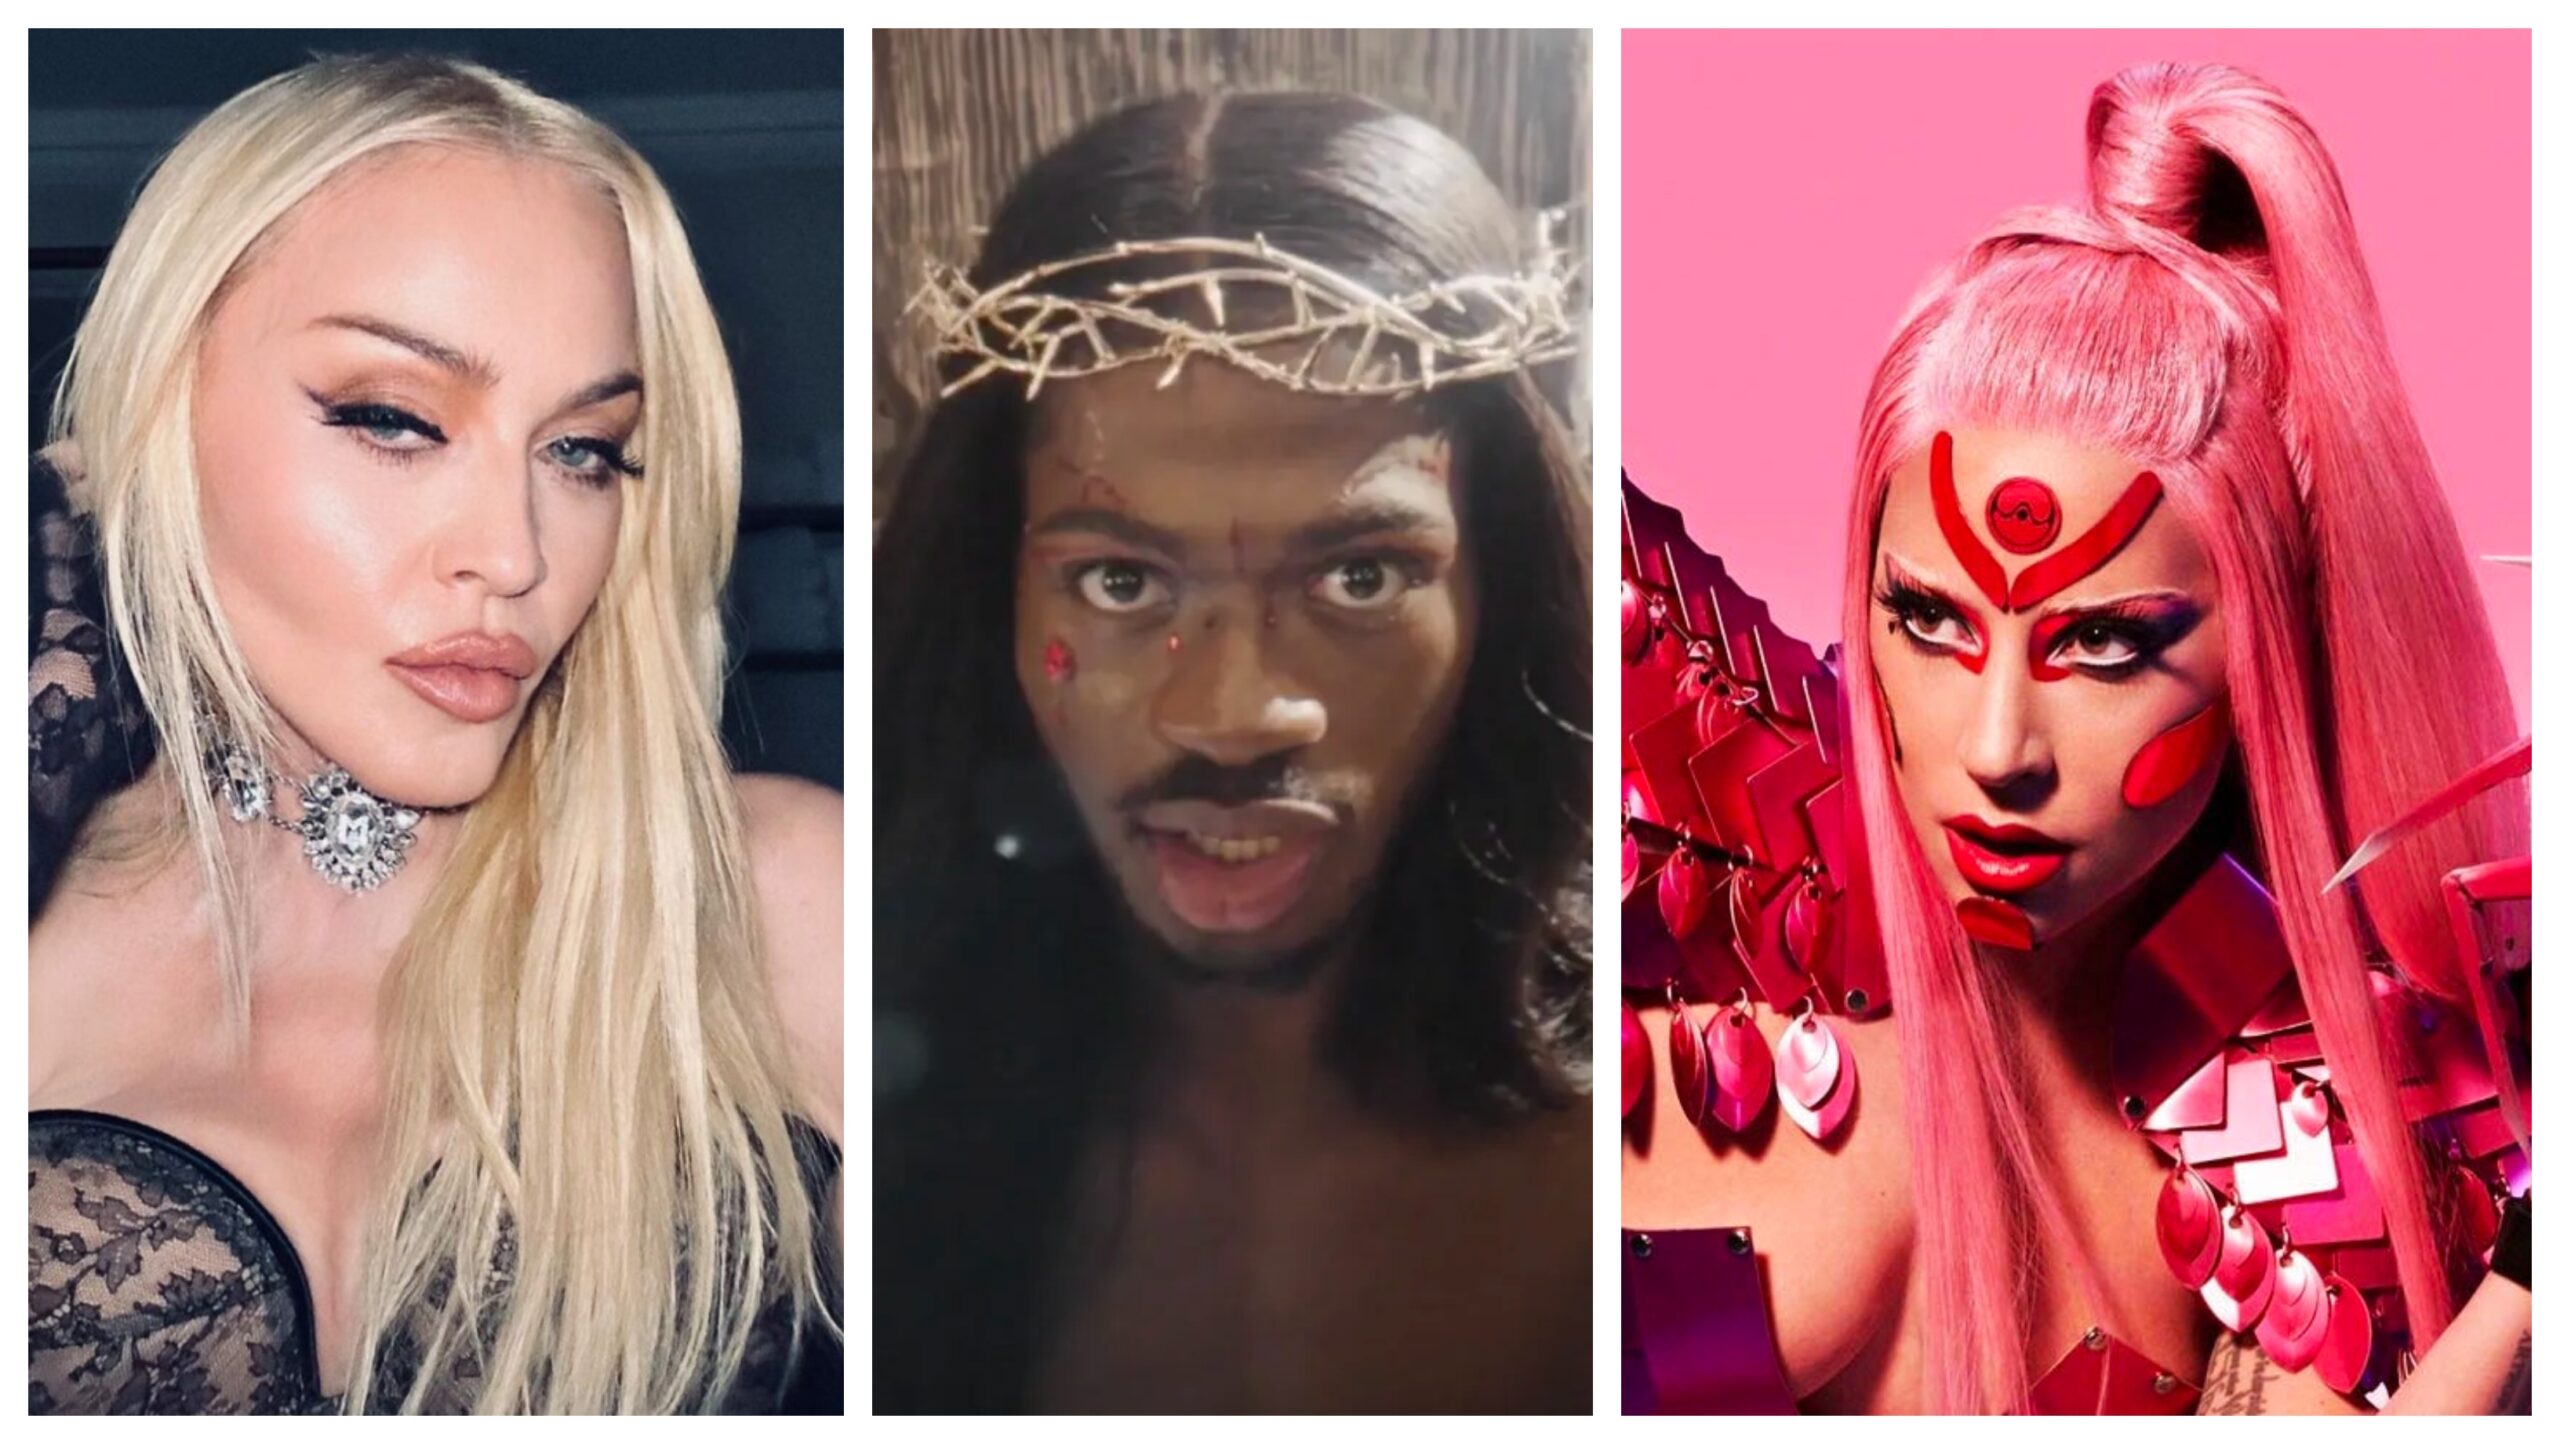 Lil Nas X on Lady Gaga & Madonna Comparisons: “I Don’t Give a F*ck What They Did”